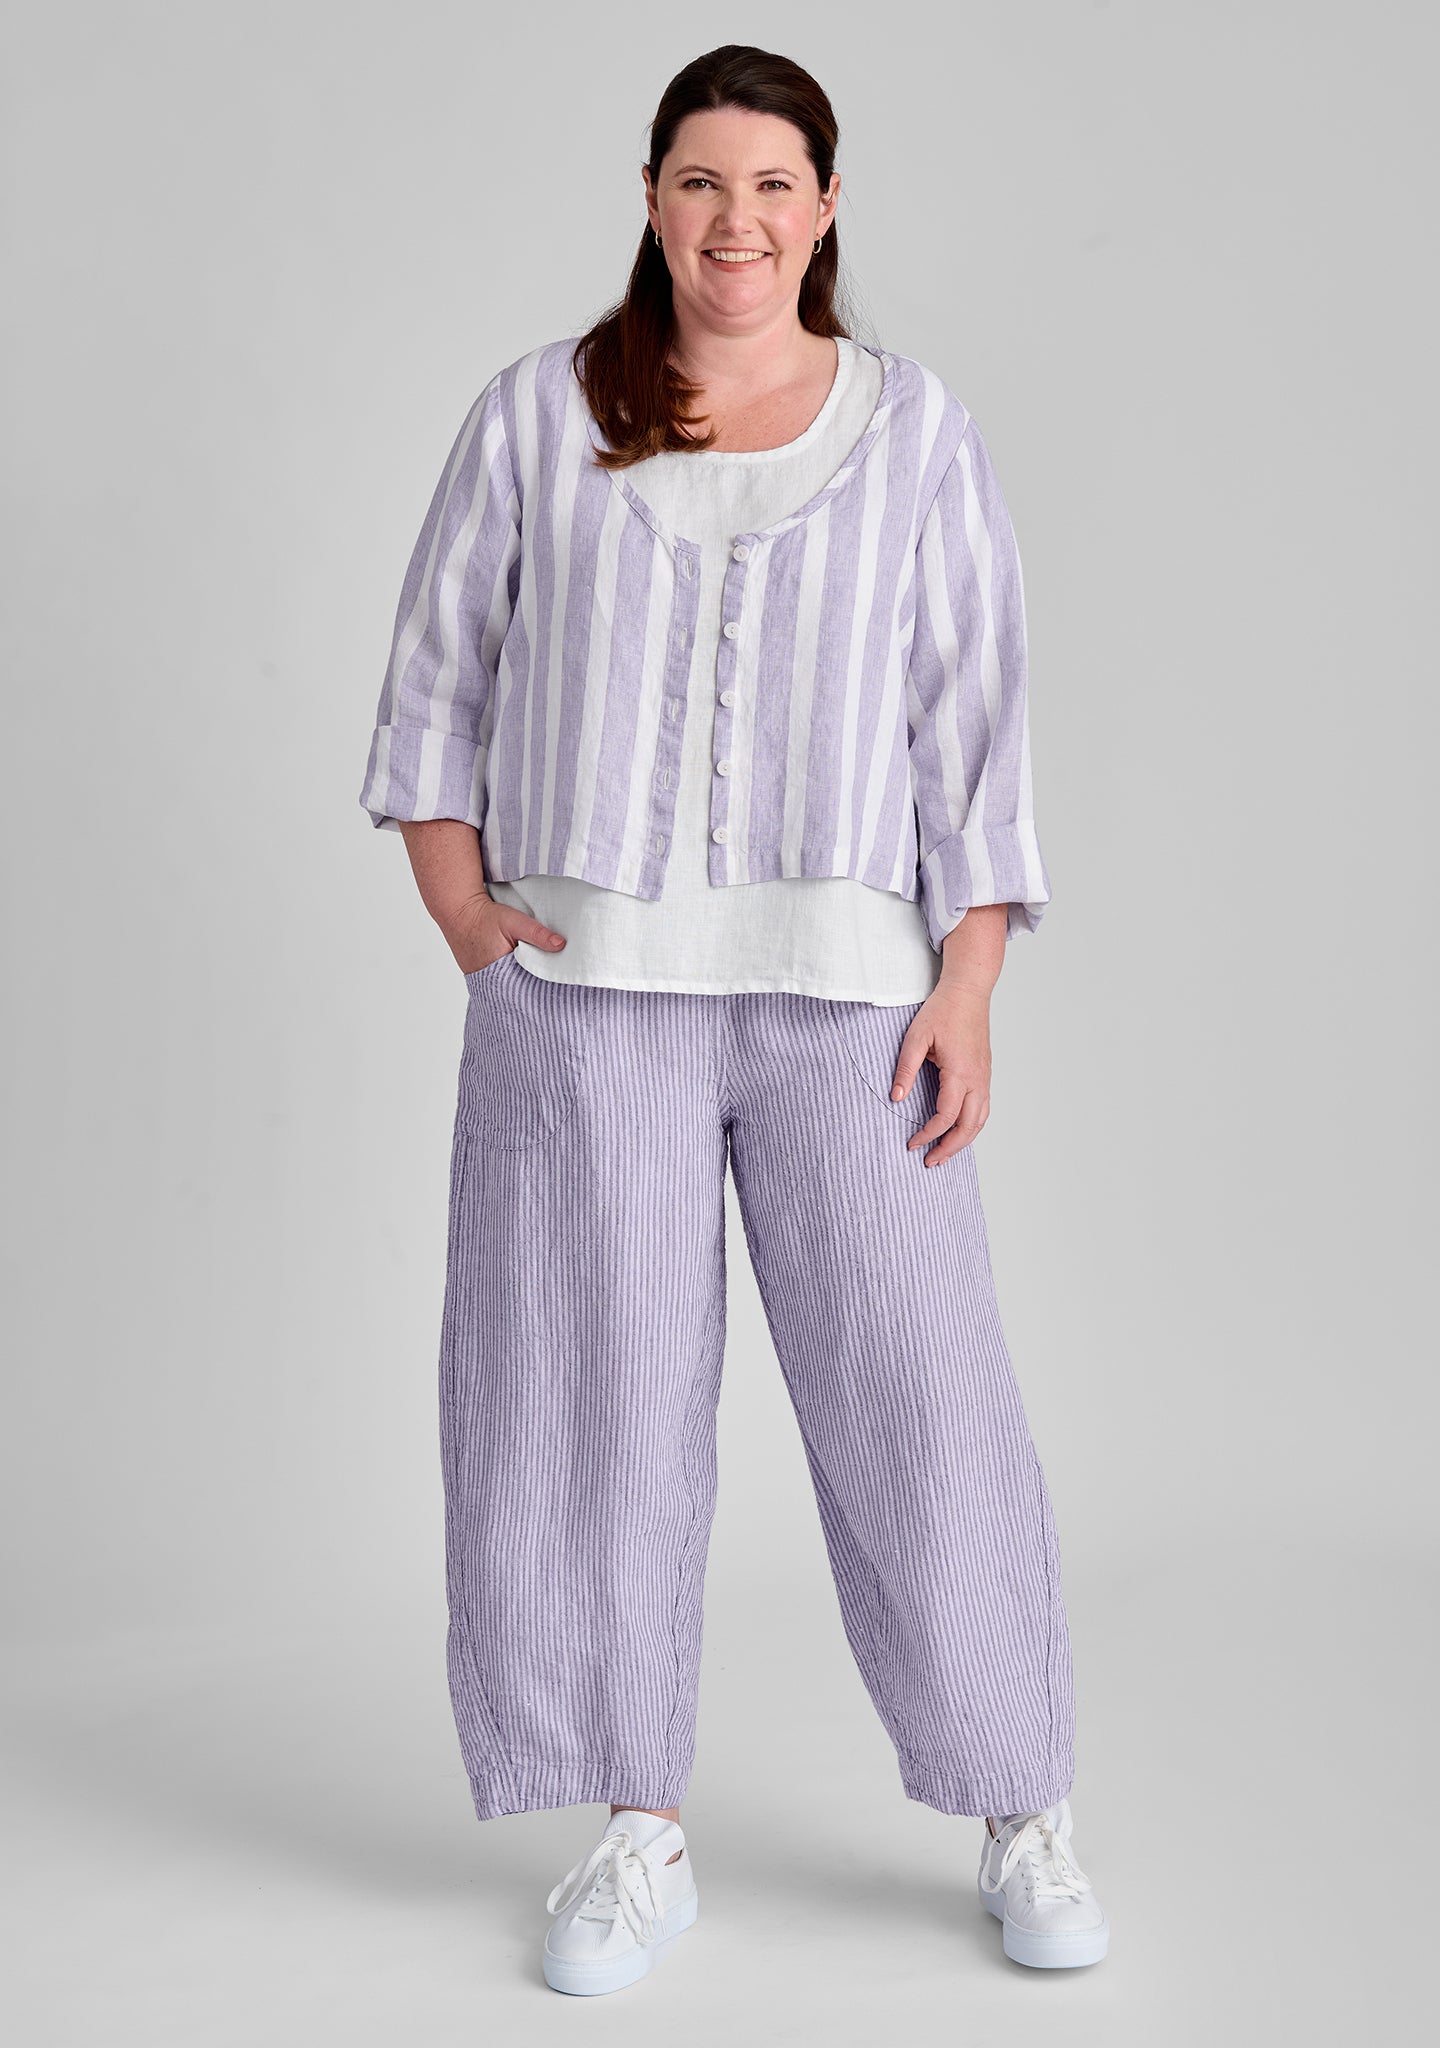 FLAX linen blouse in purple with linen tee in white with linen pants in purple